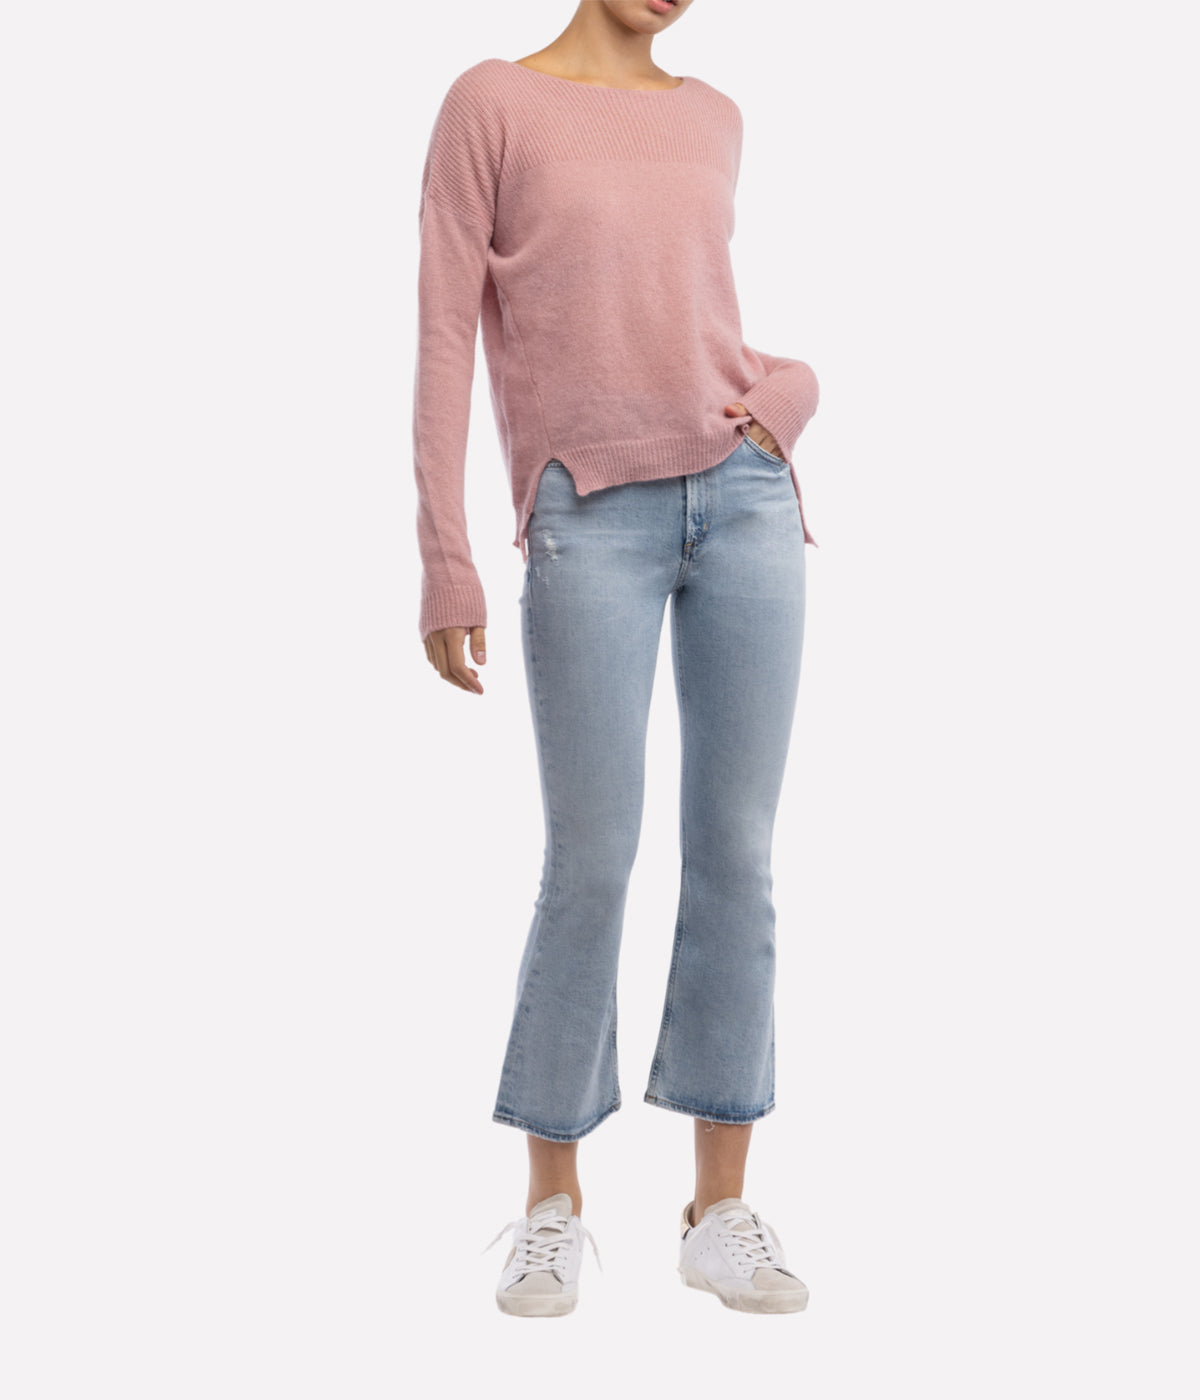 Everleigh Cashmere Knit in Blush